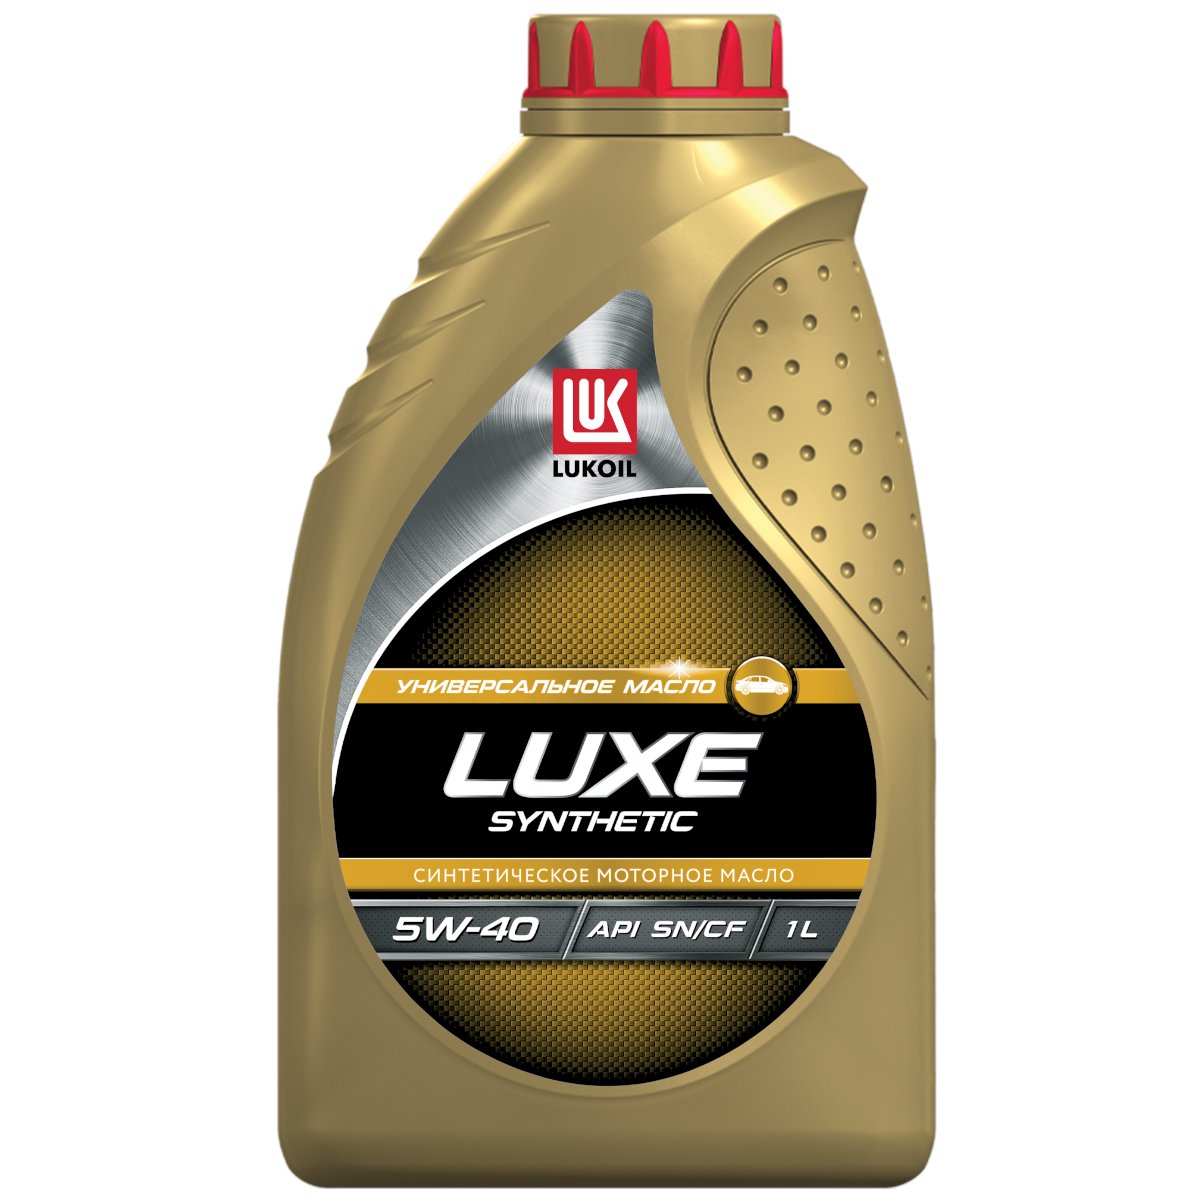 Масло моторное LUKOIL LUXE SYNTHETIC 5W-40 1 л